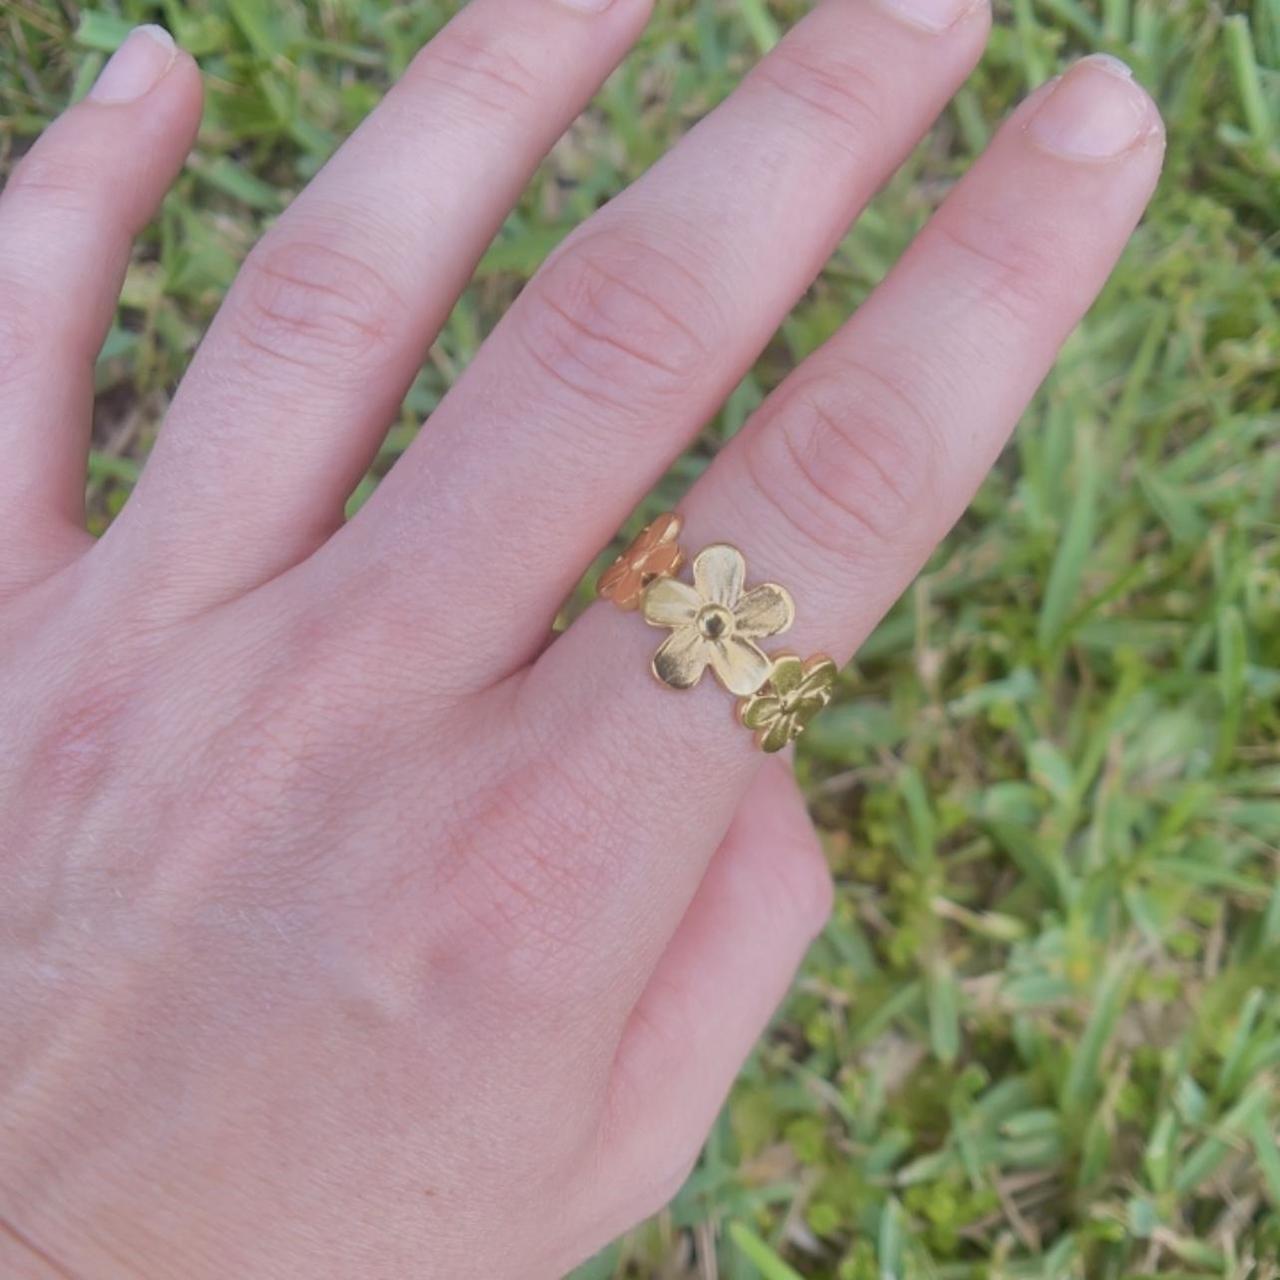 Louis Vuitton limited edition gold flower ring only - Depop